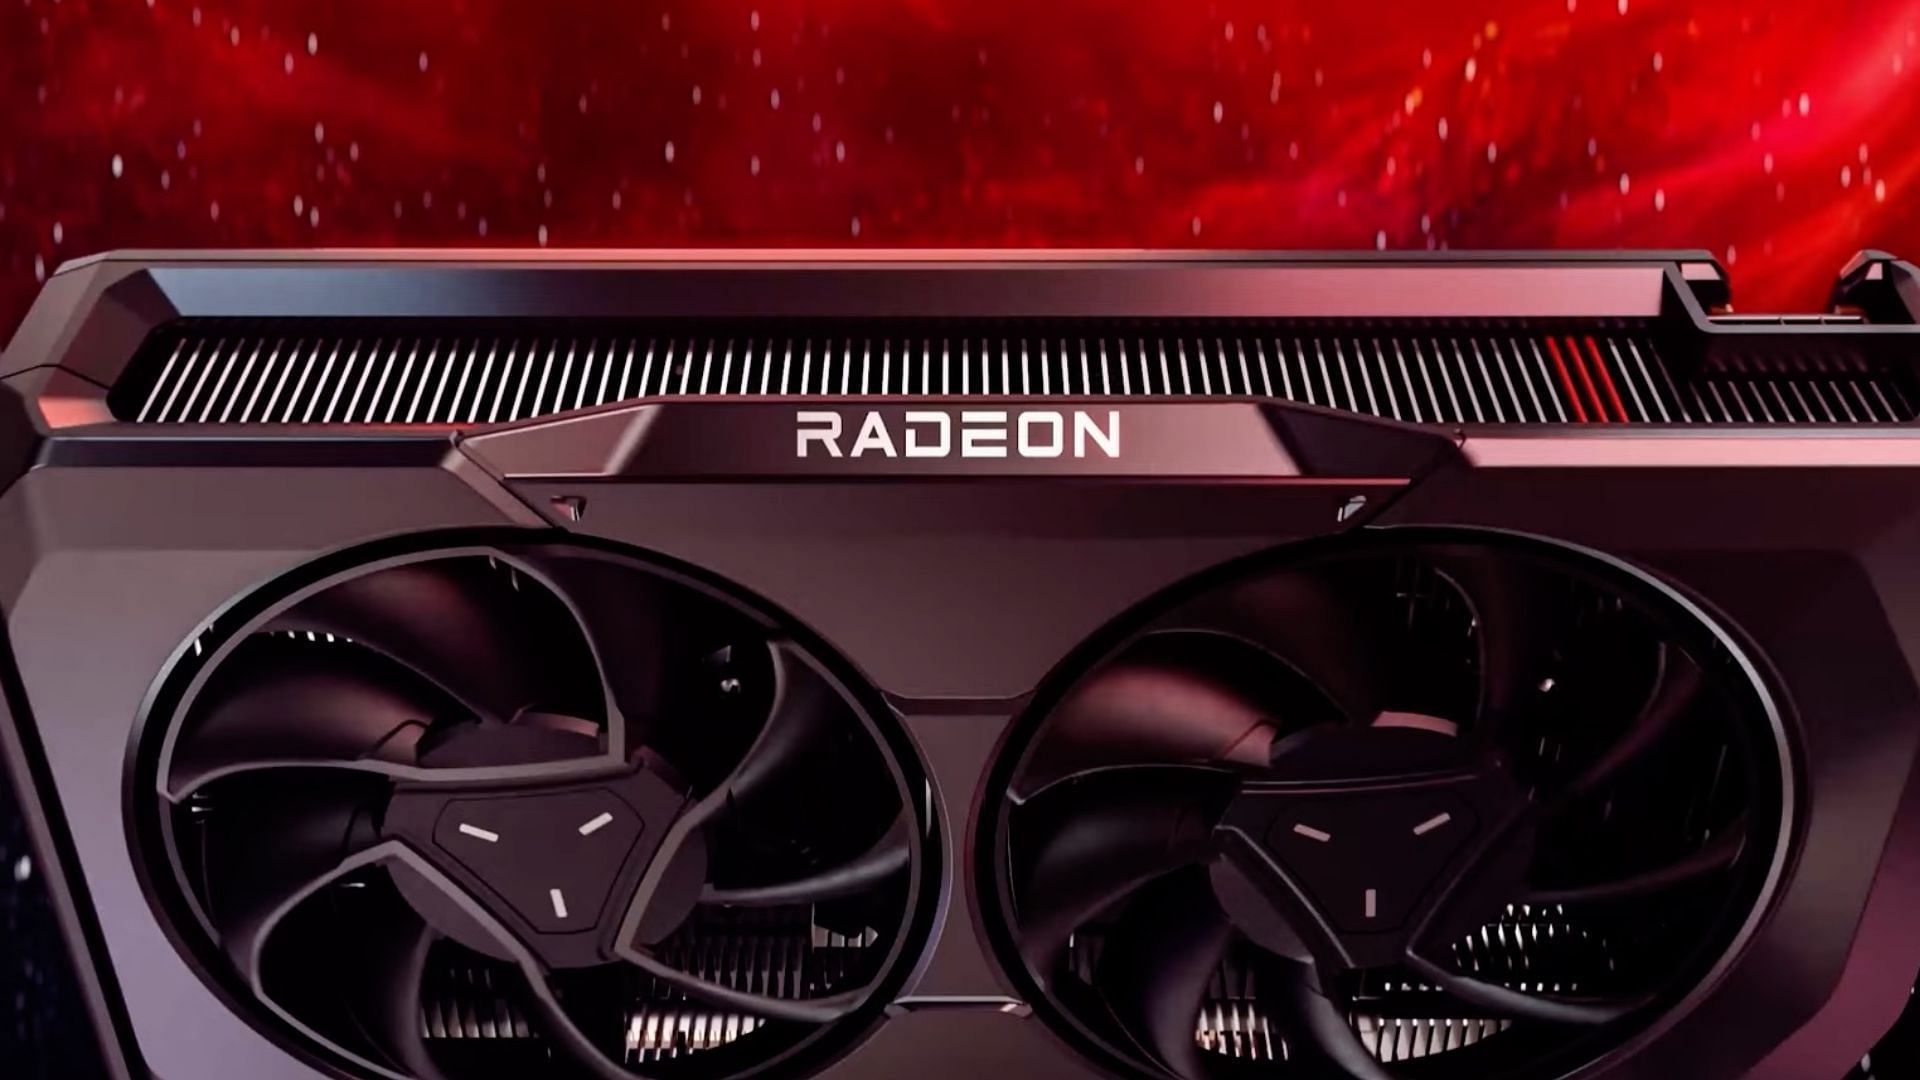 The AMD RX 7600 XT will be Team Red